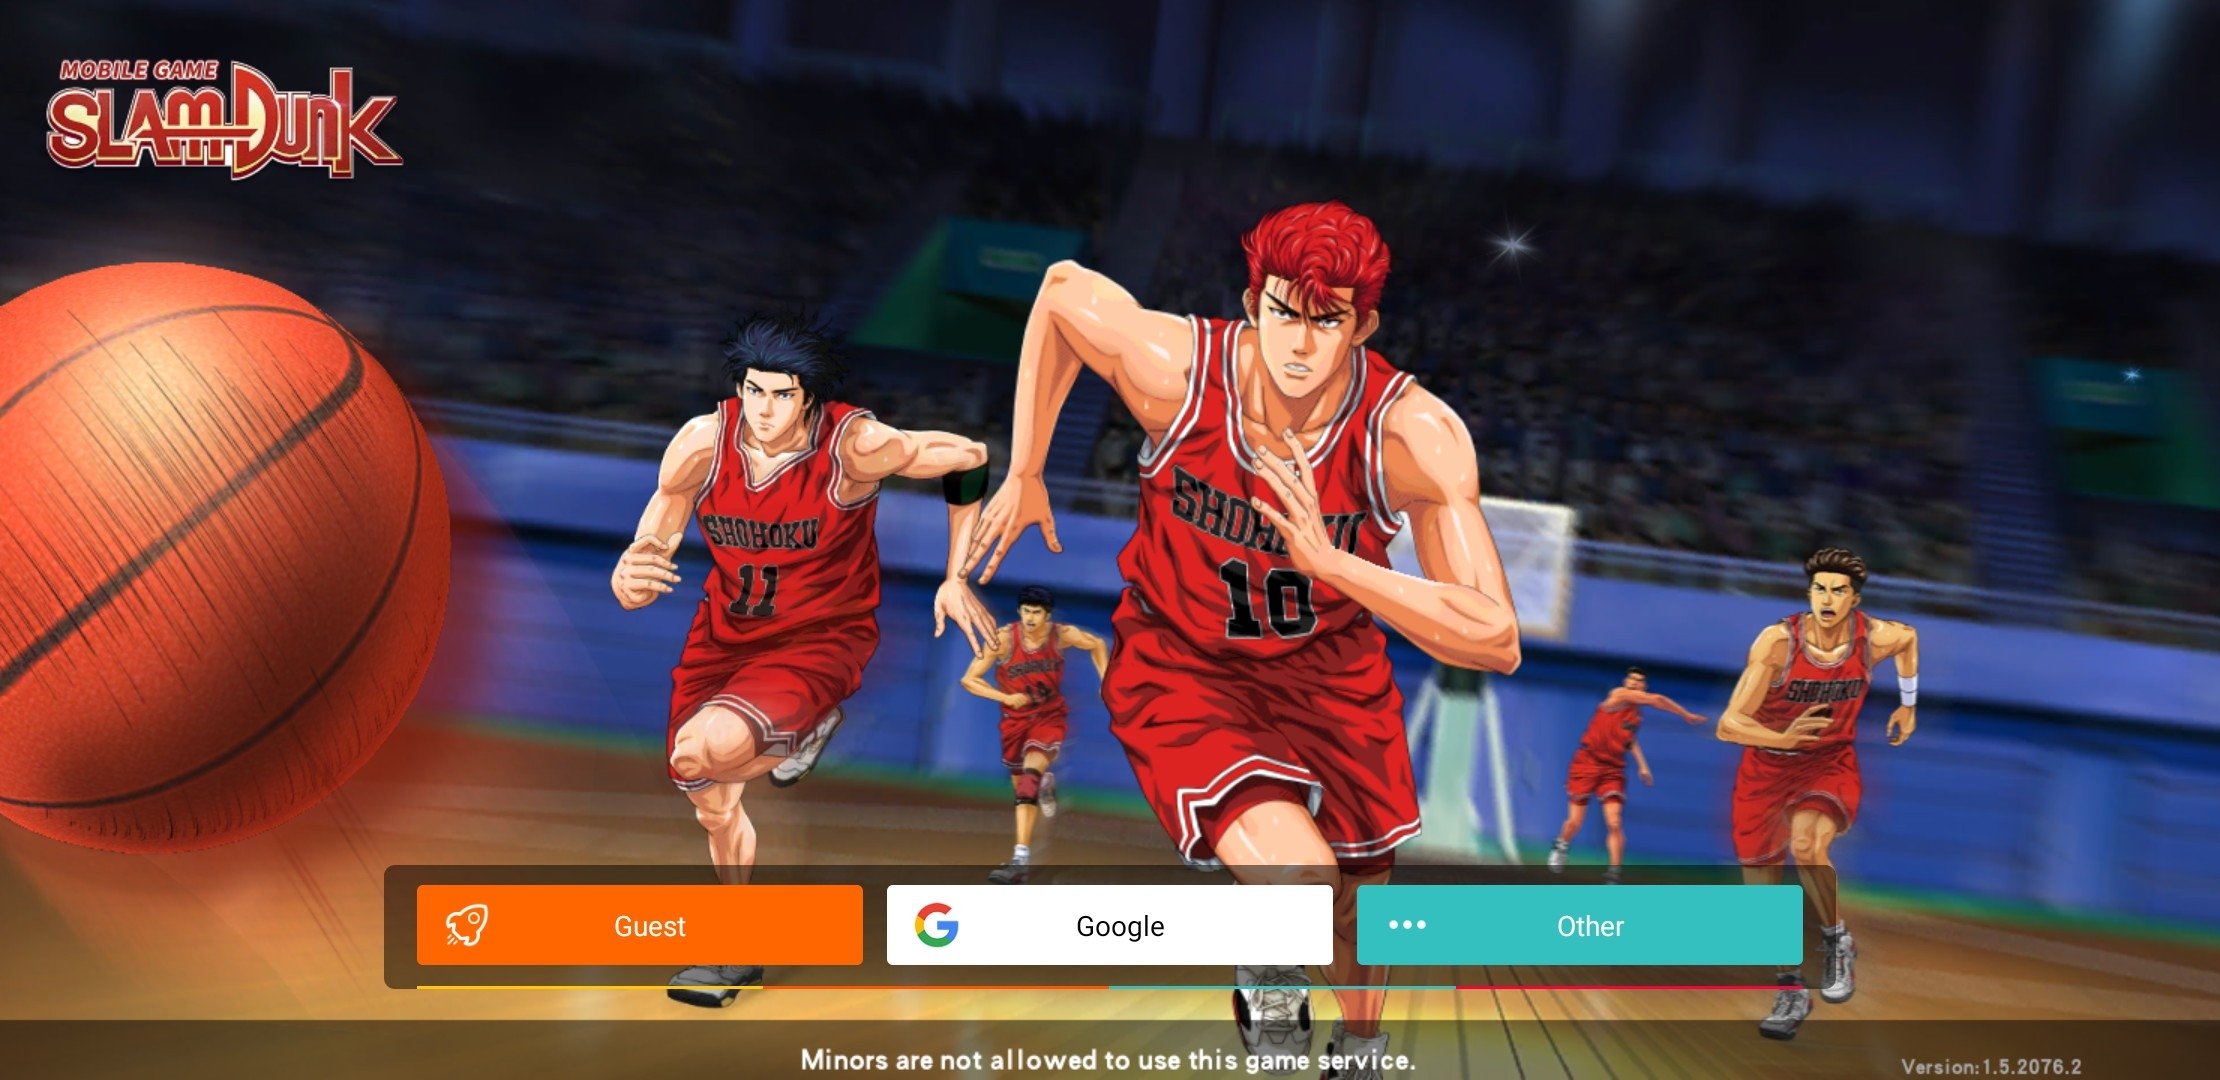 Slam Dunk 6.3 Download for Android APK Free